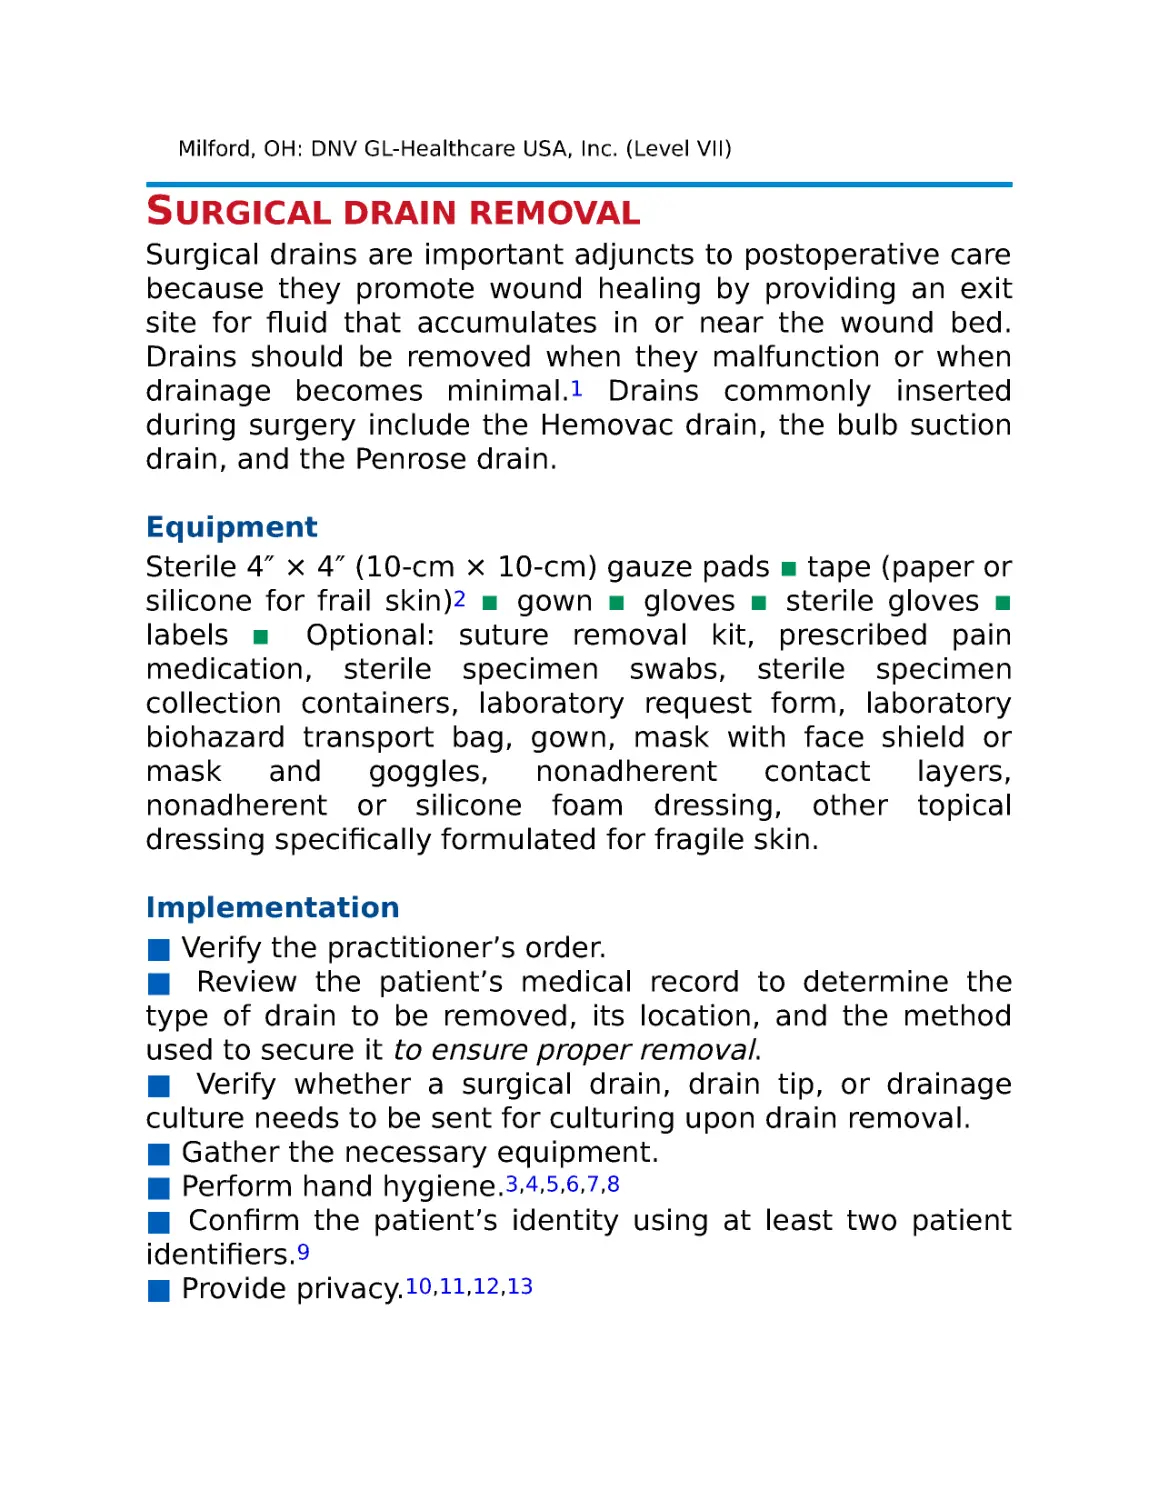 Surgical drain removal